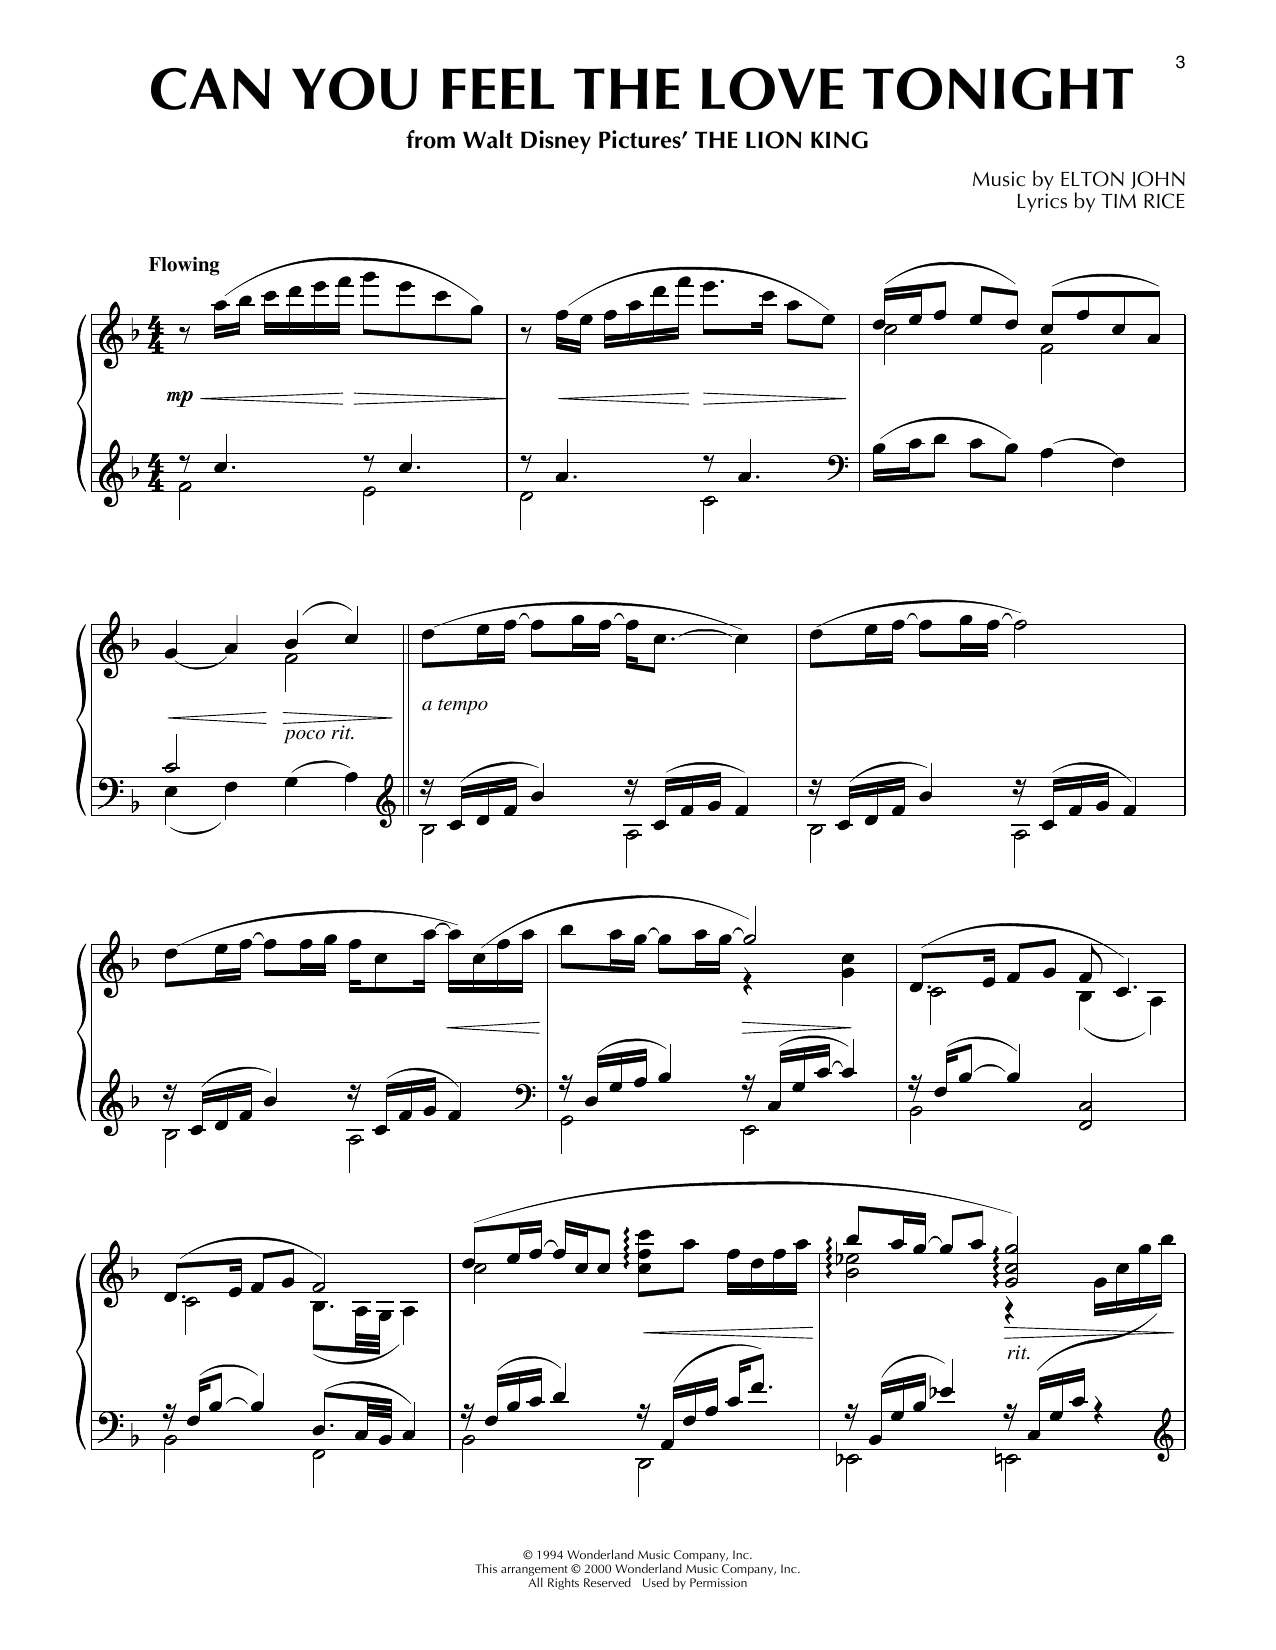 Download Elton John Can You Feel The Love Tonight (from The Sheet Music